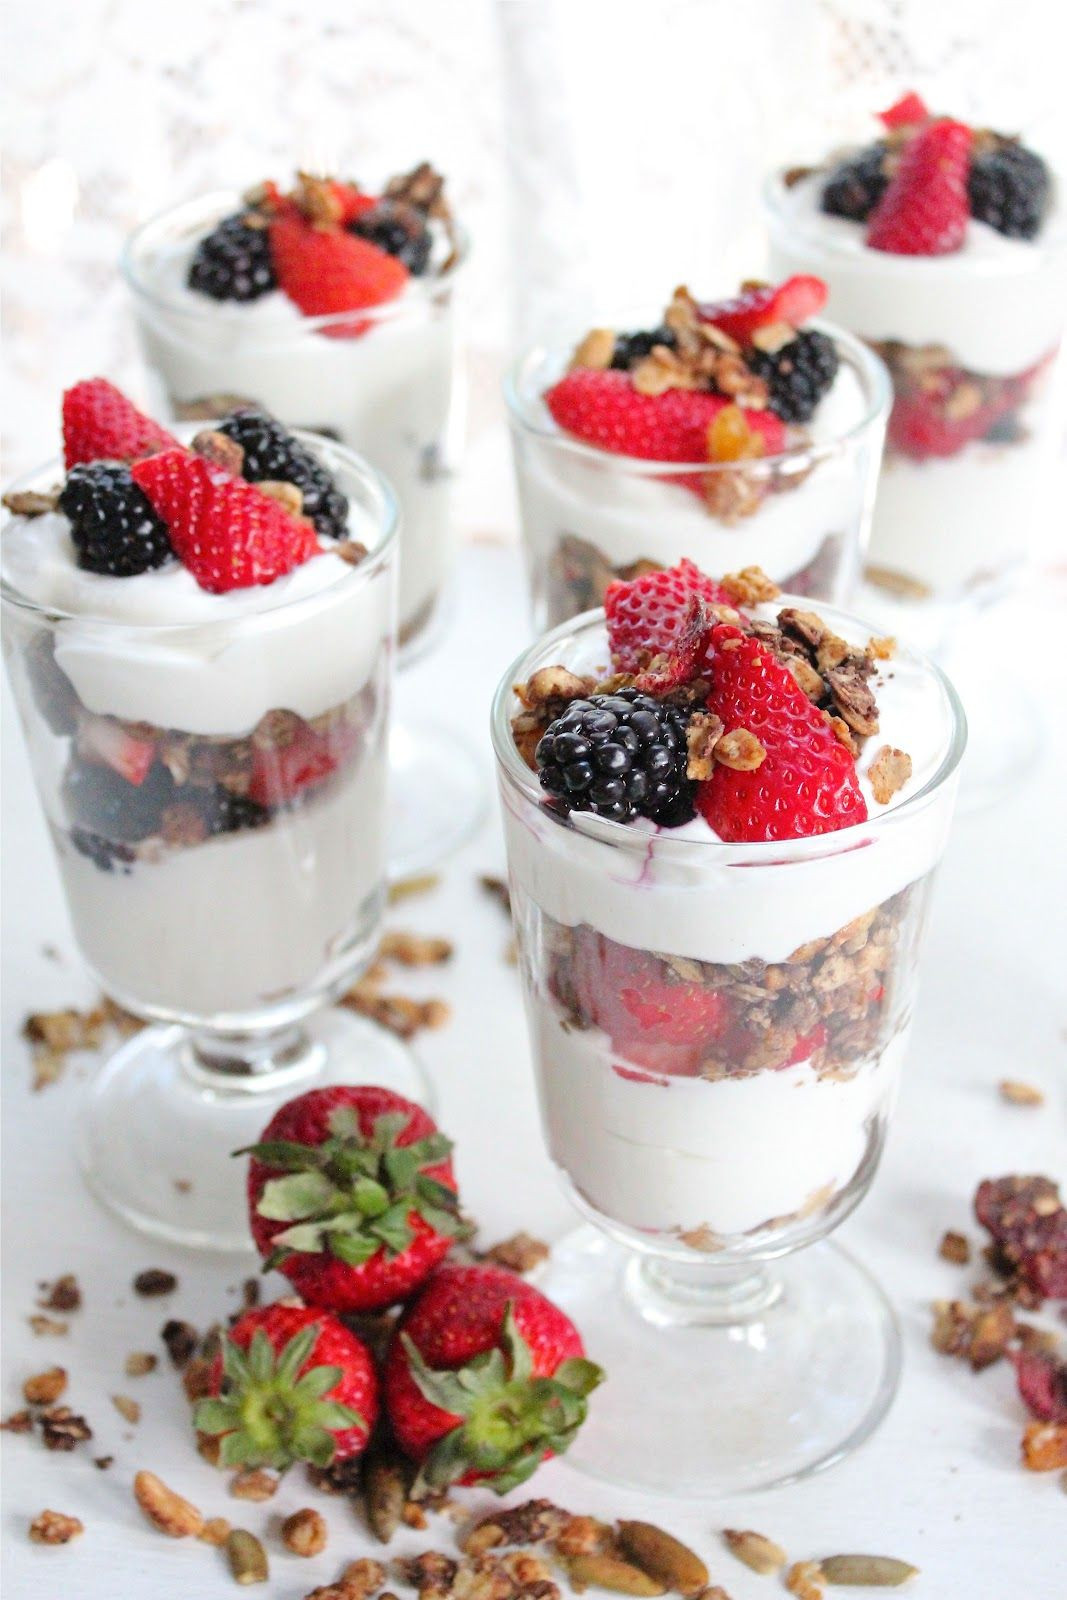 Low Fat Desserts To Buy
 Pin on Healthy Snacks